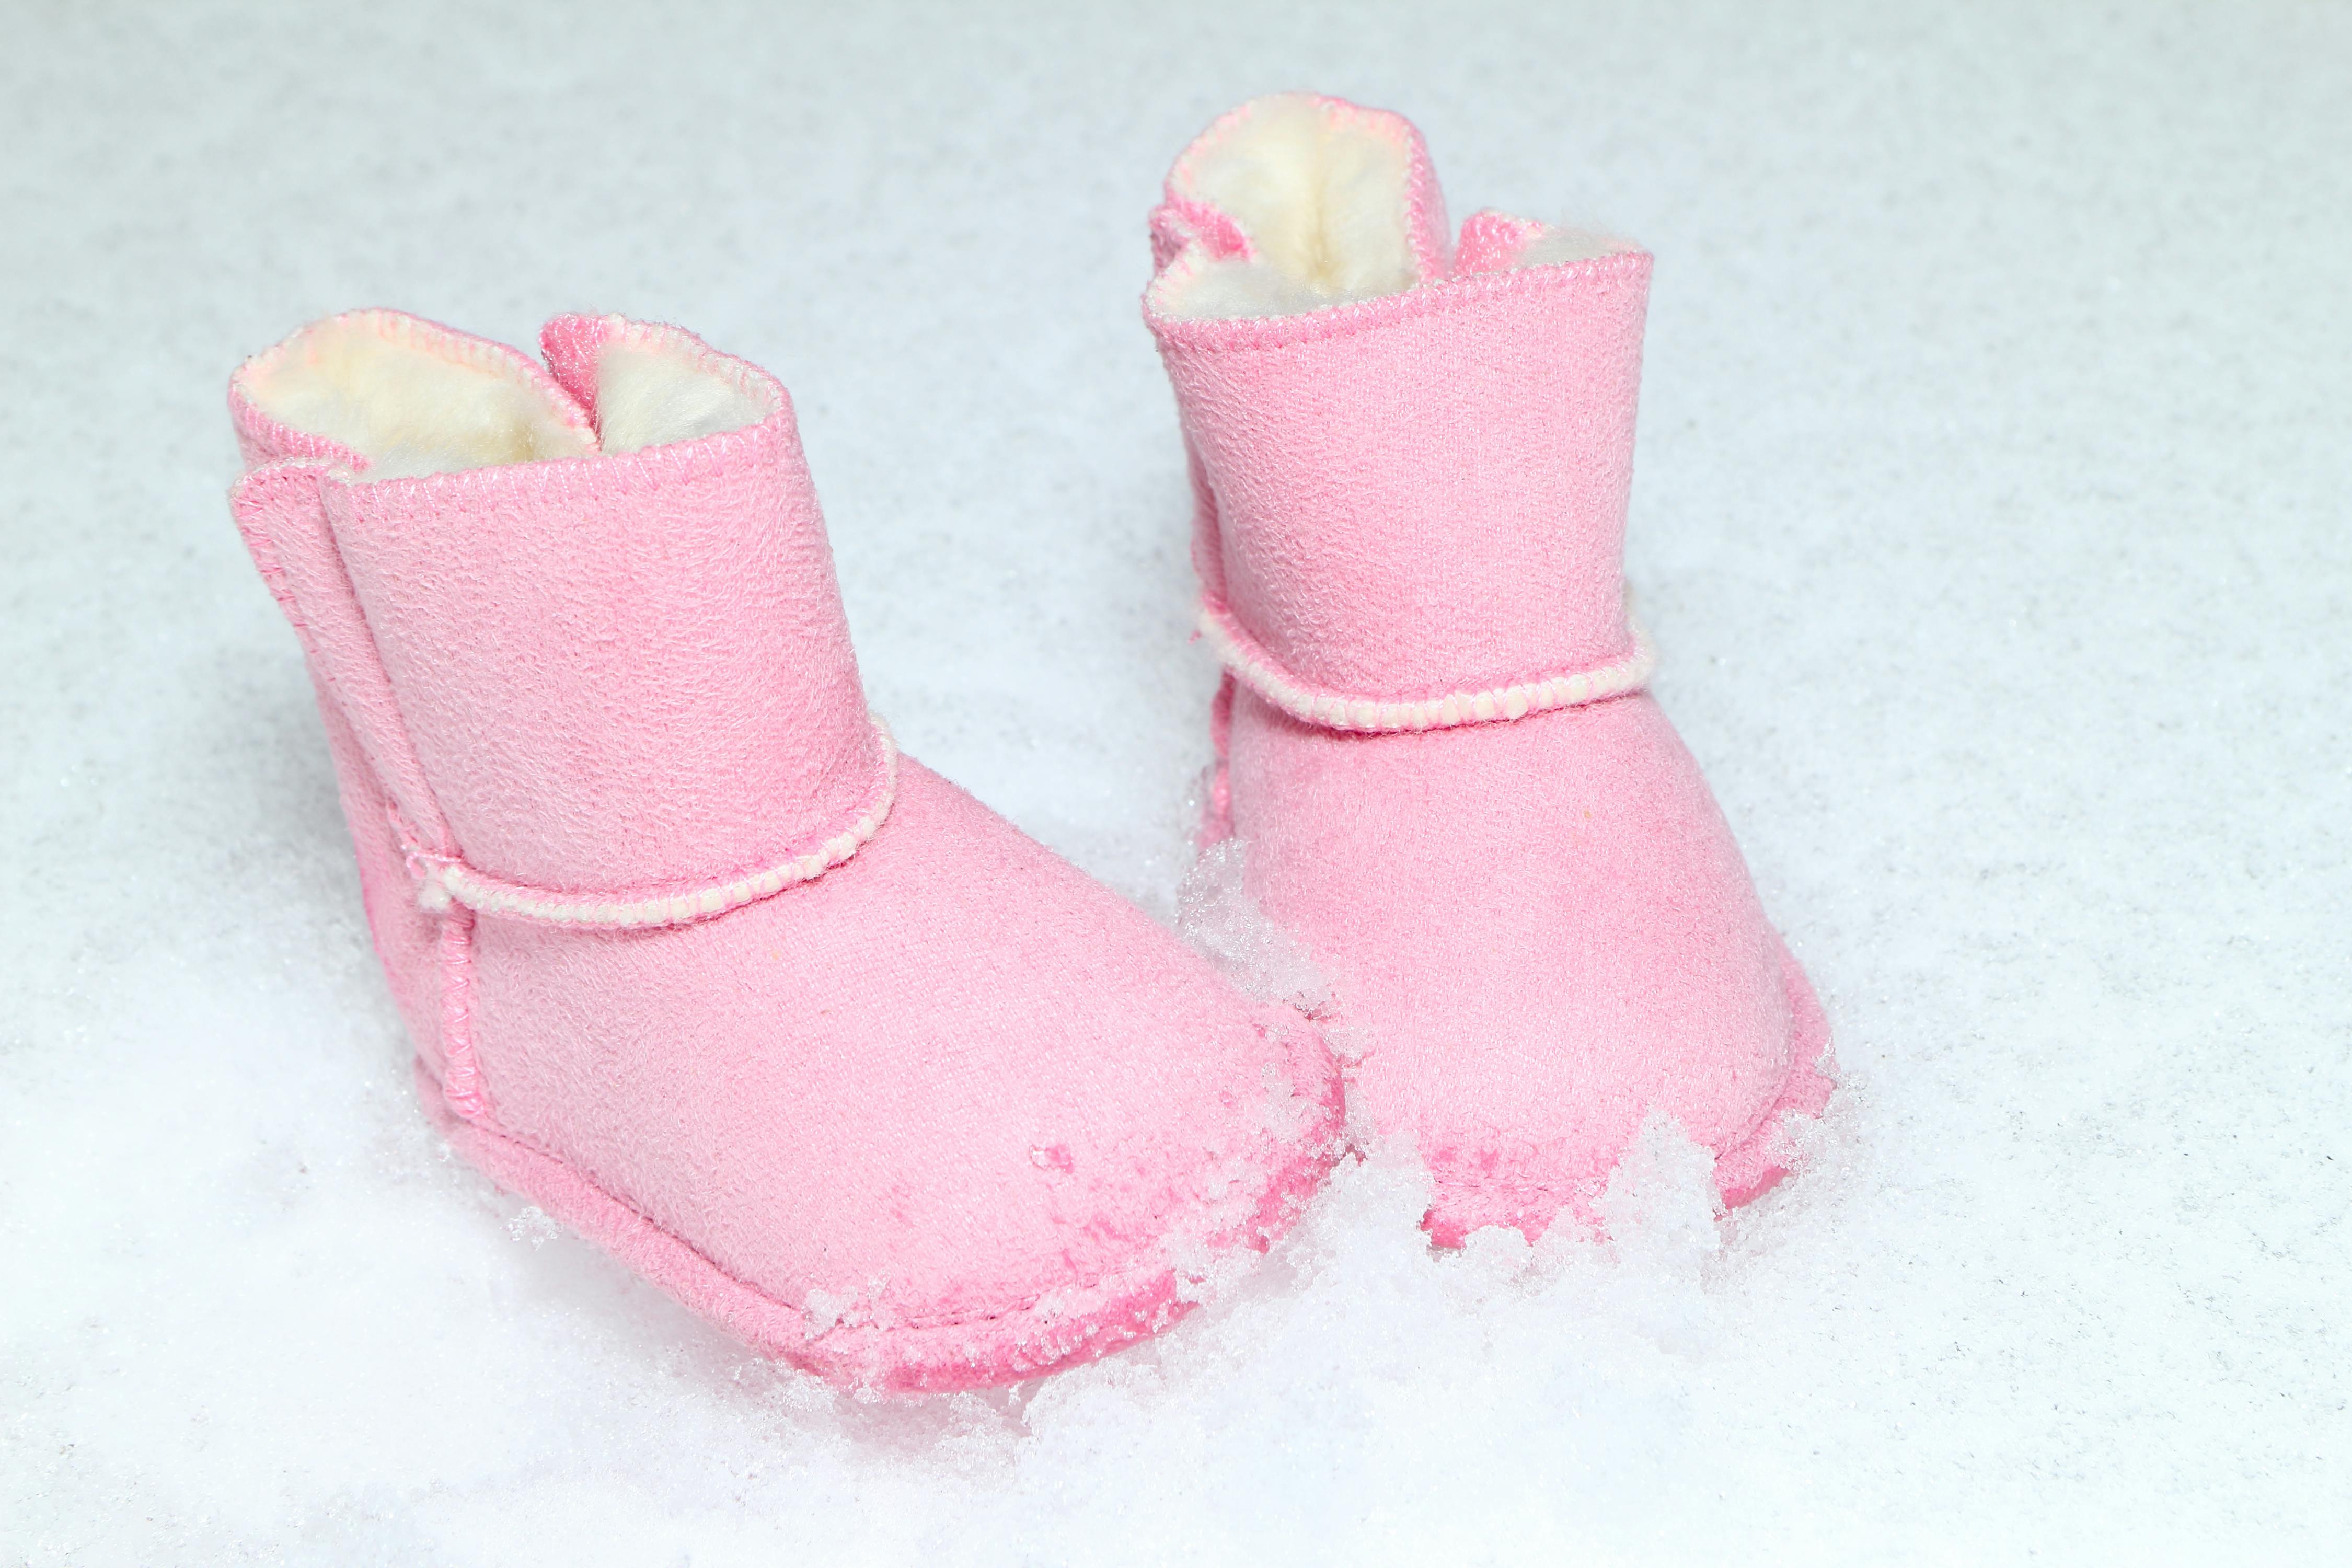 Girls' Bebe Boots, as Low as $13.48 at 